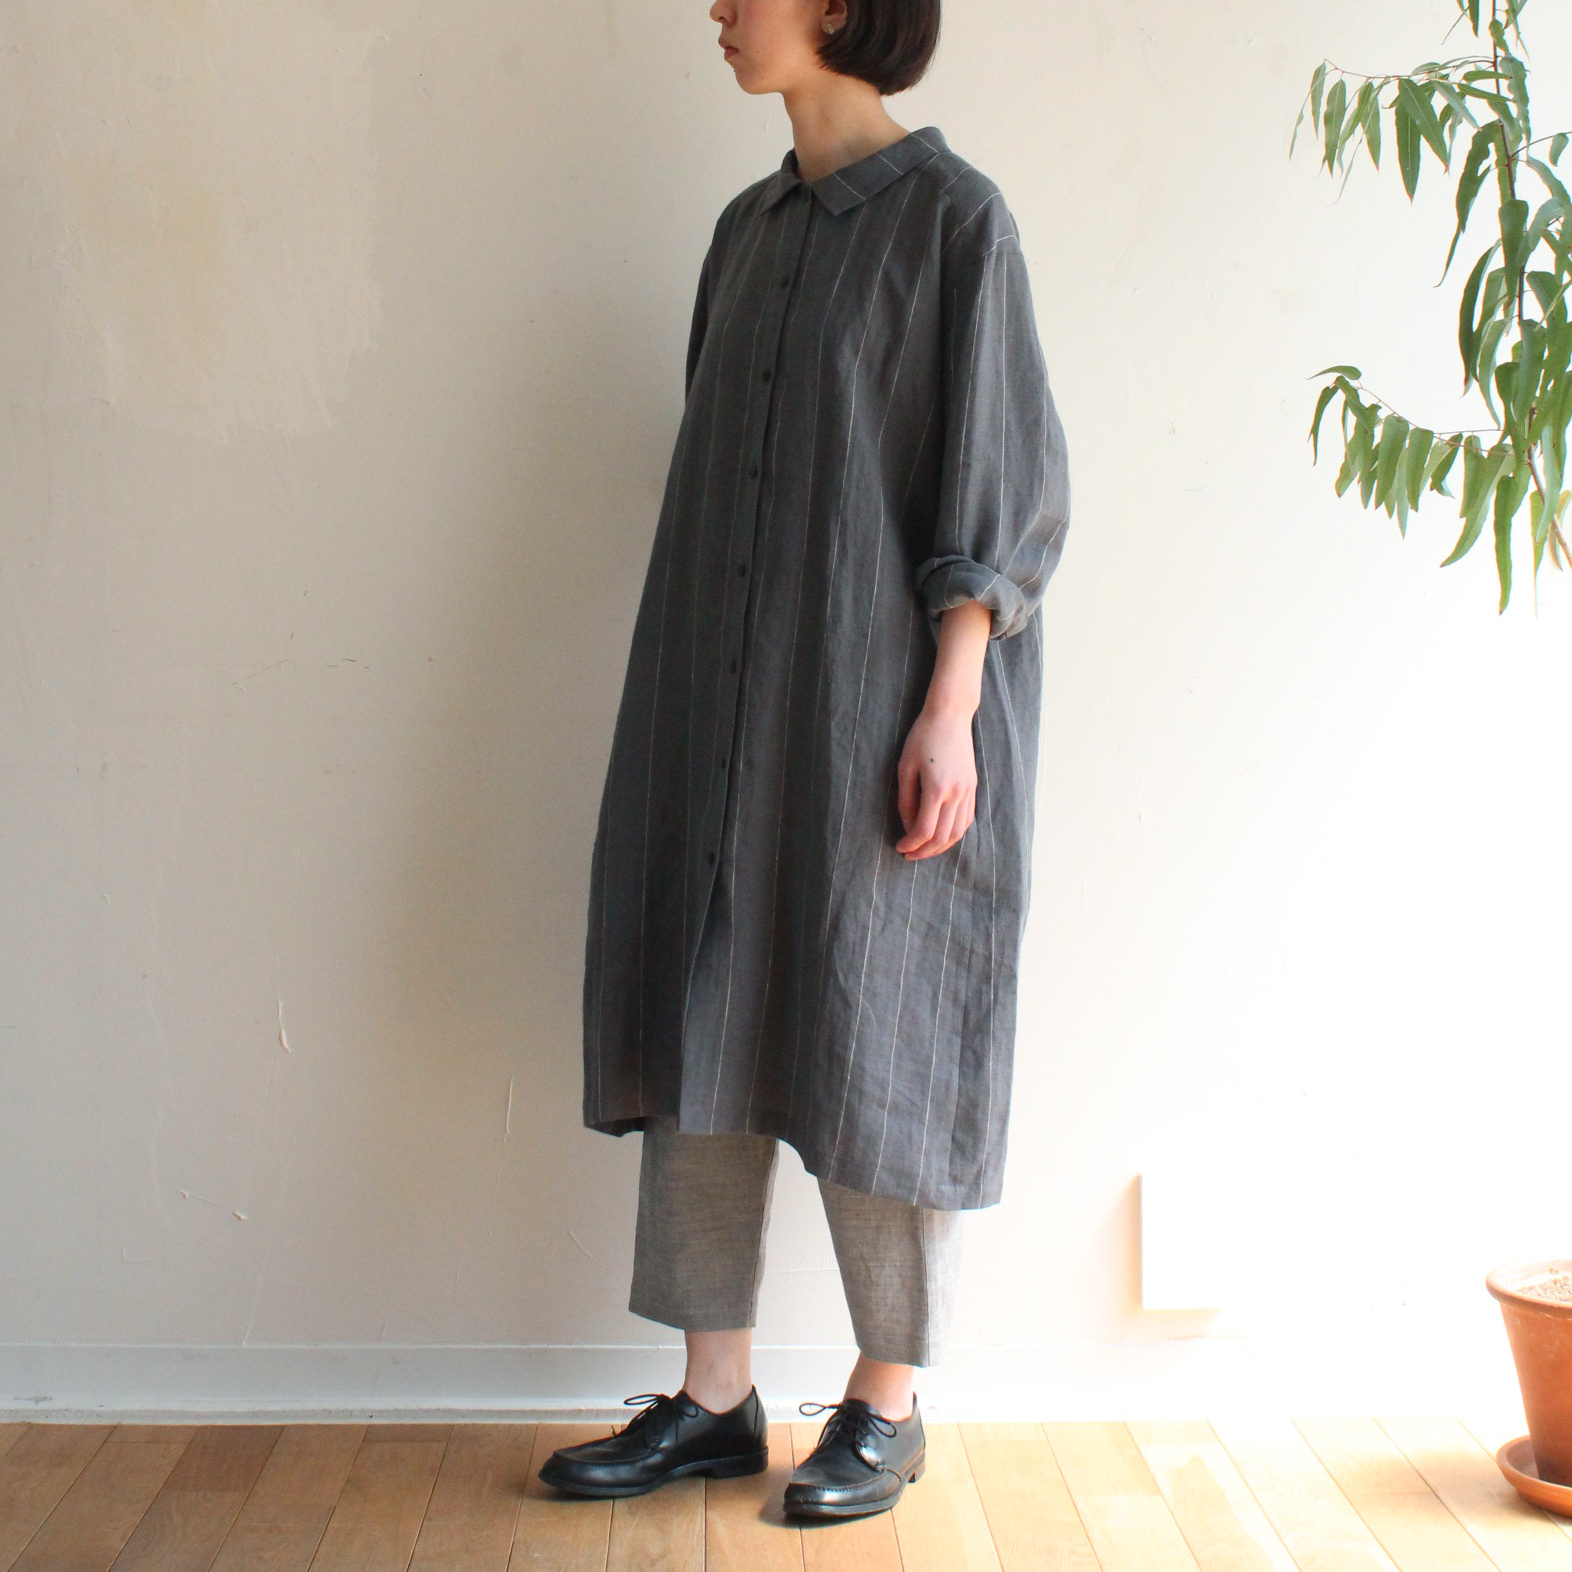 mill: muku:Linen clothing made in Lithuania 2日目